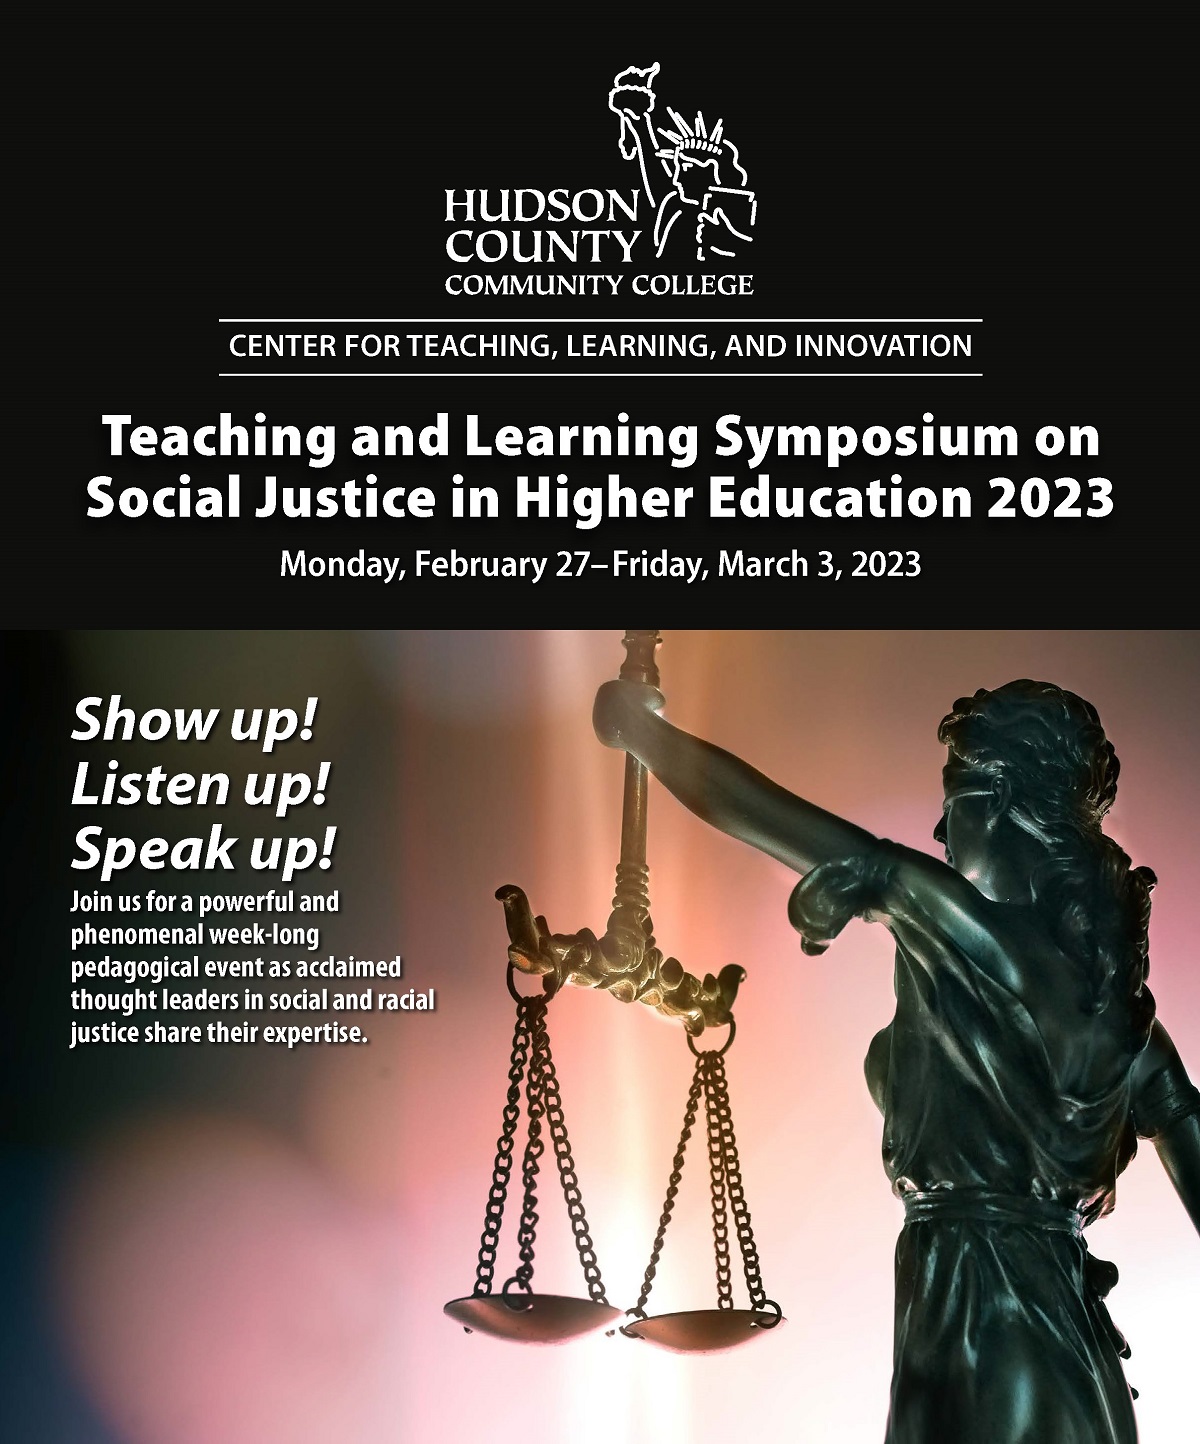 Teaching and Learning Symposium on Social Justice in Higher Education 2023 Agenda